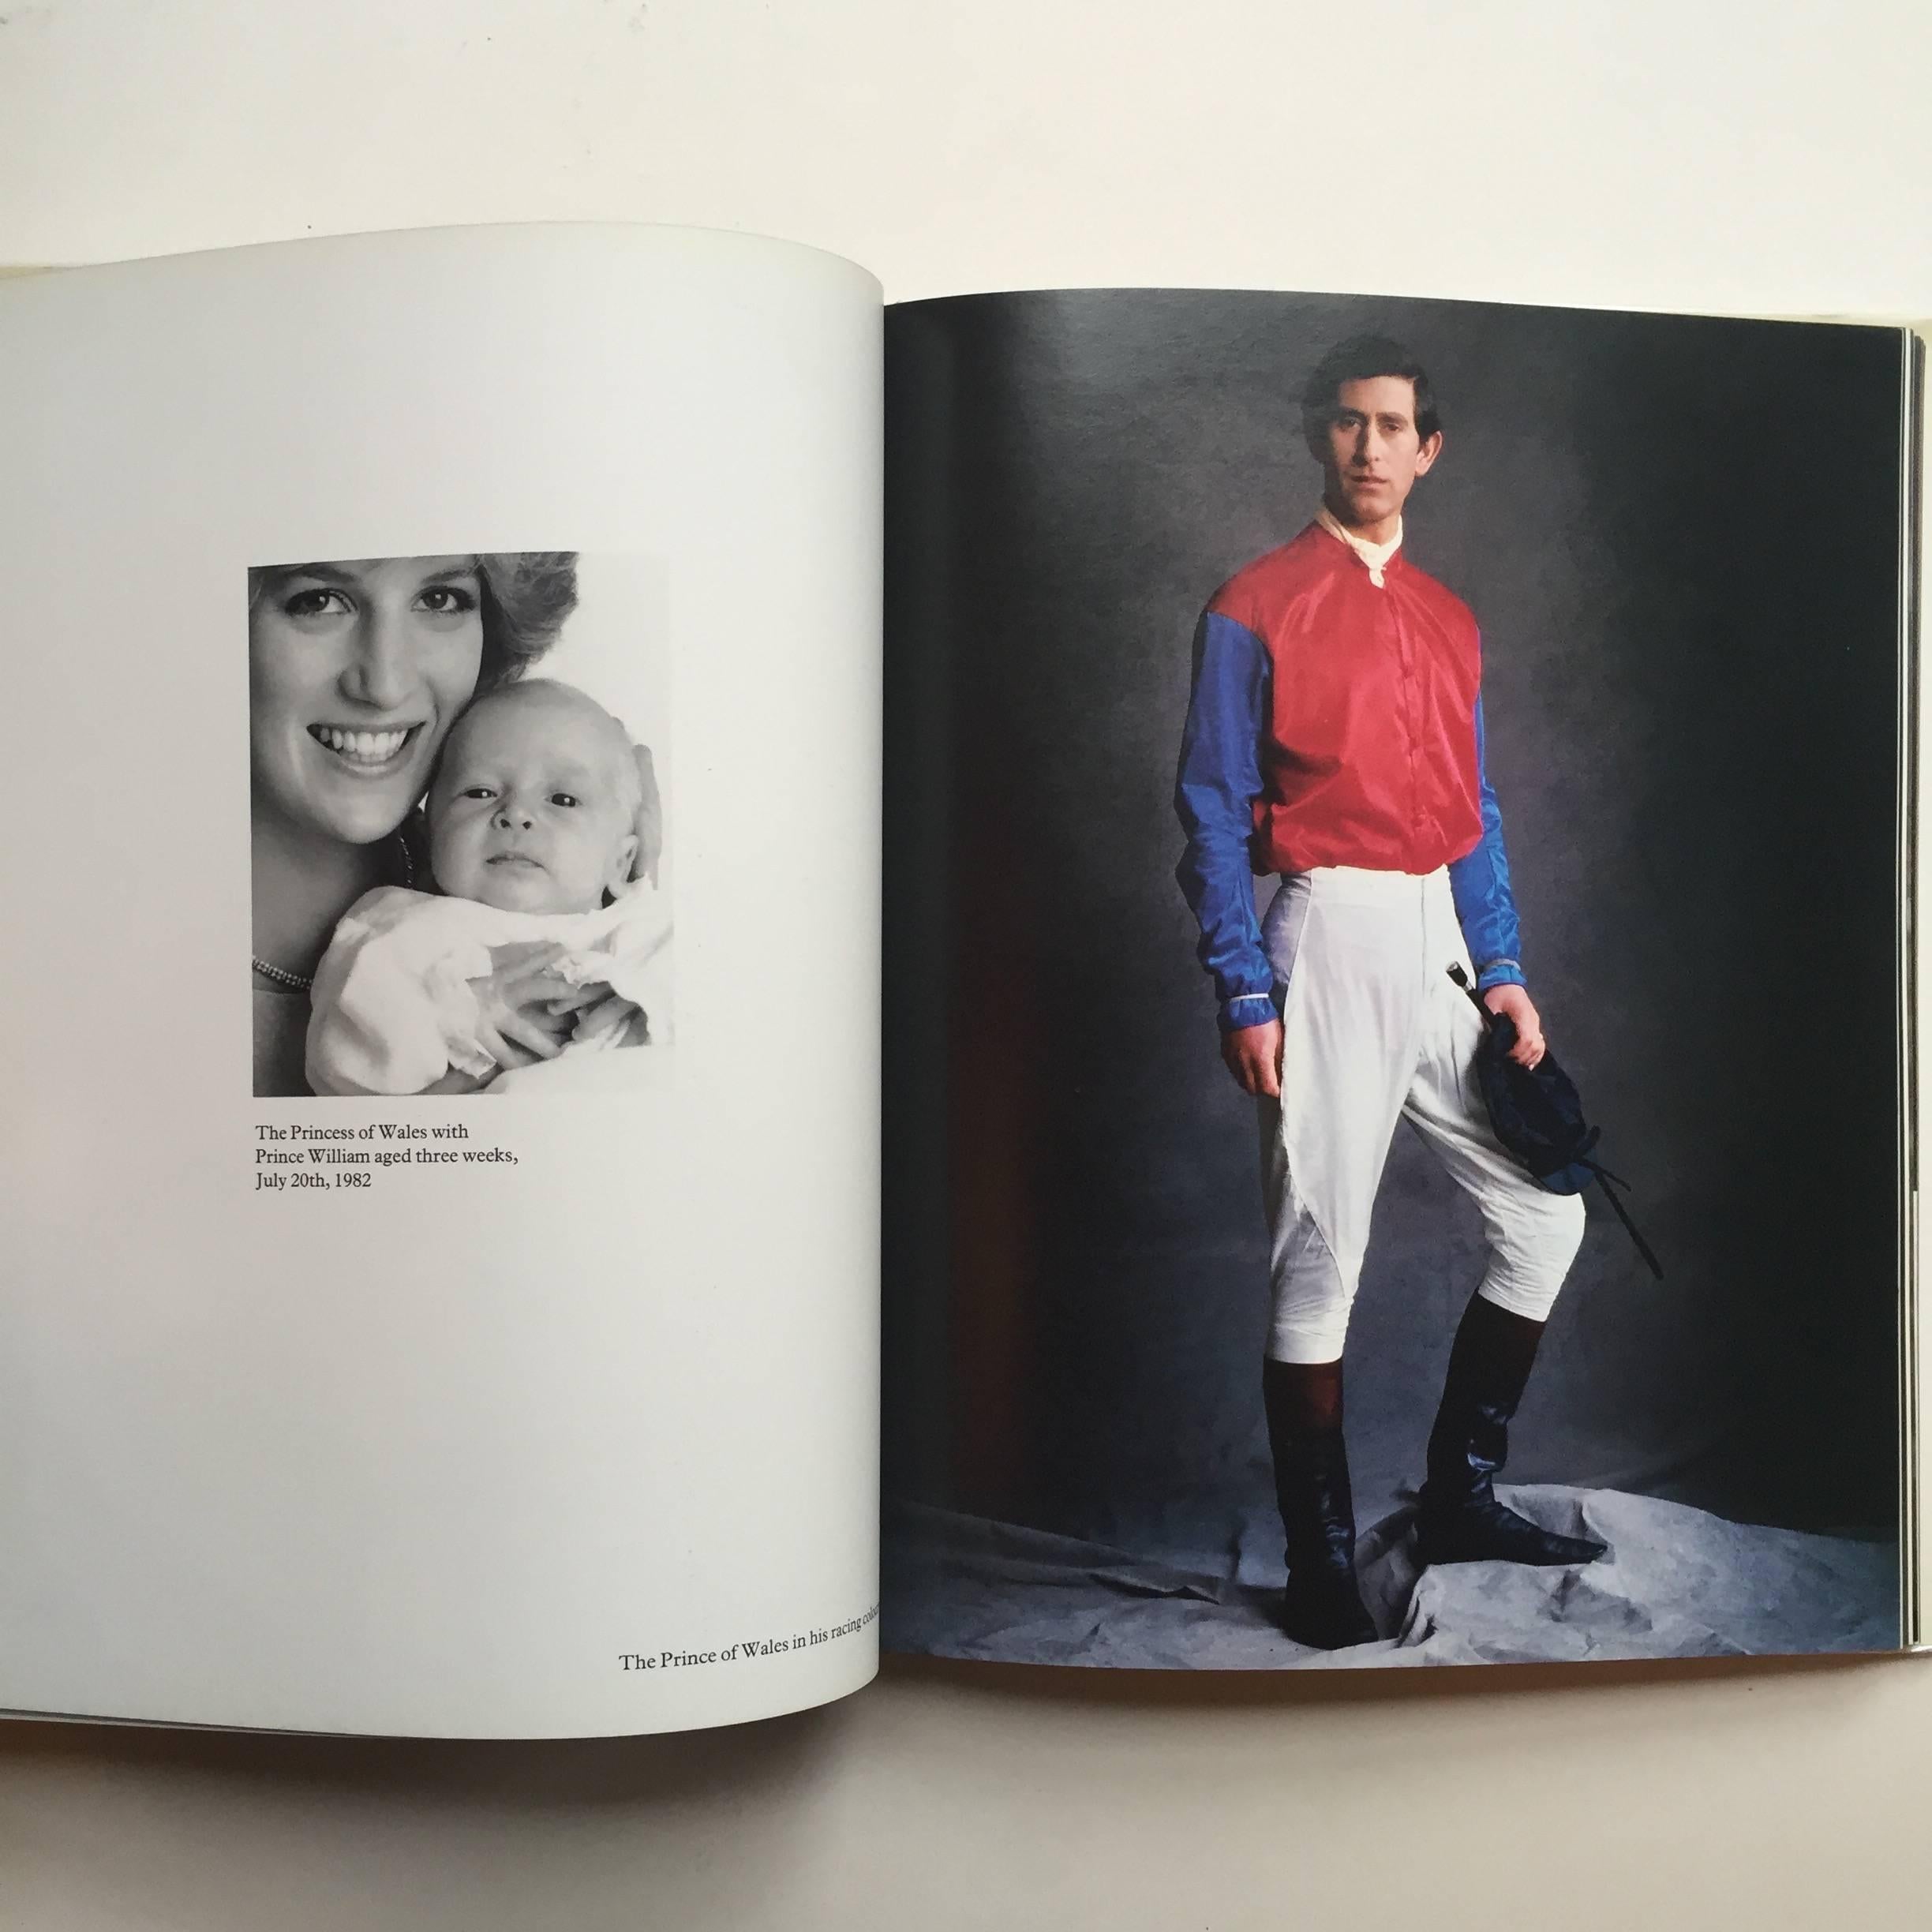 First edition, published by Weidenfeld & Nicolson, 1983. A collection of portraits taken between the years 1979-1983 by the late Lord Snowdon. Over the 4 year period, the number of iconic and influential figures featured here is striking, from the